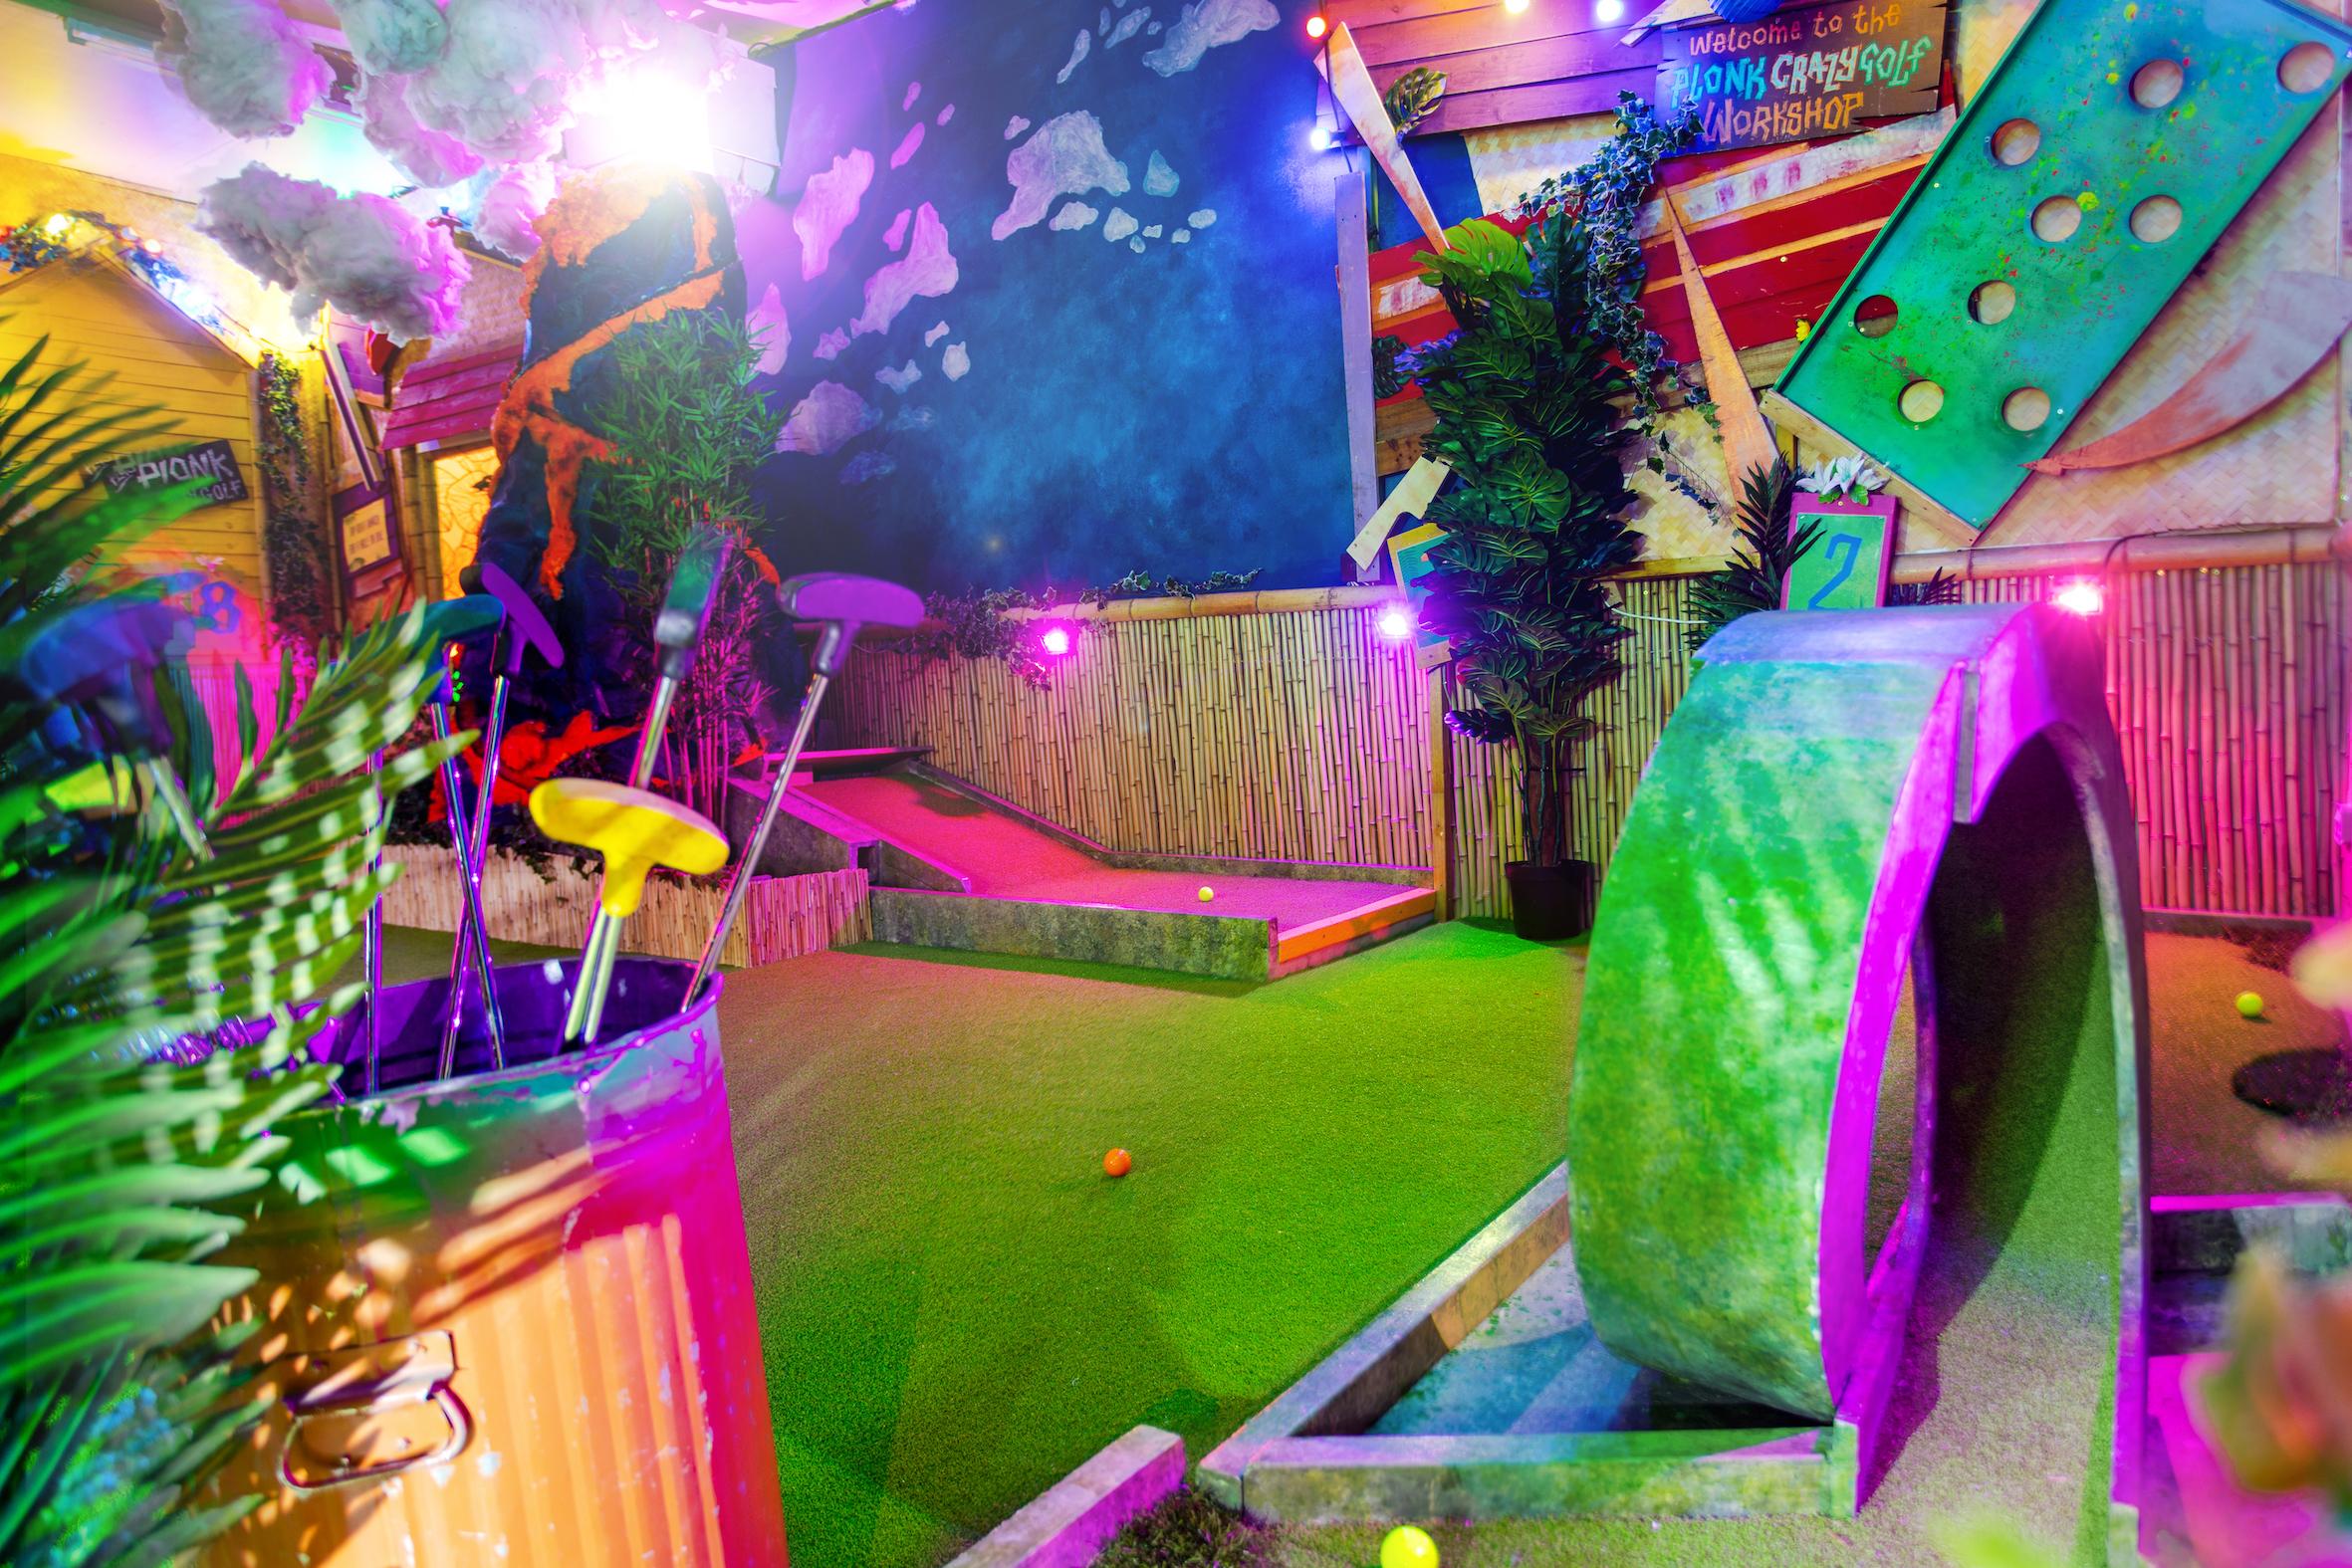 The Whole Course, Plonk Crazy Golf Shoreditch photo #1